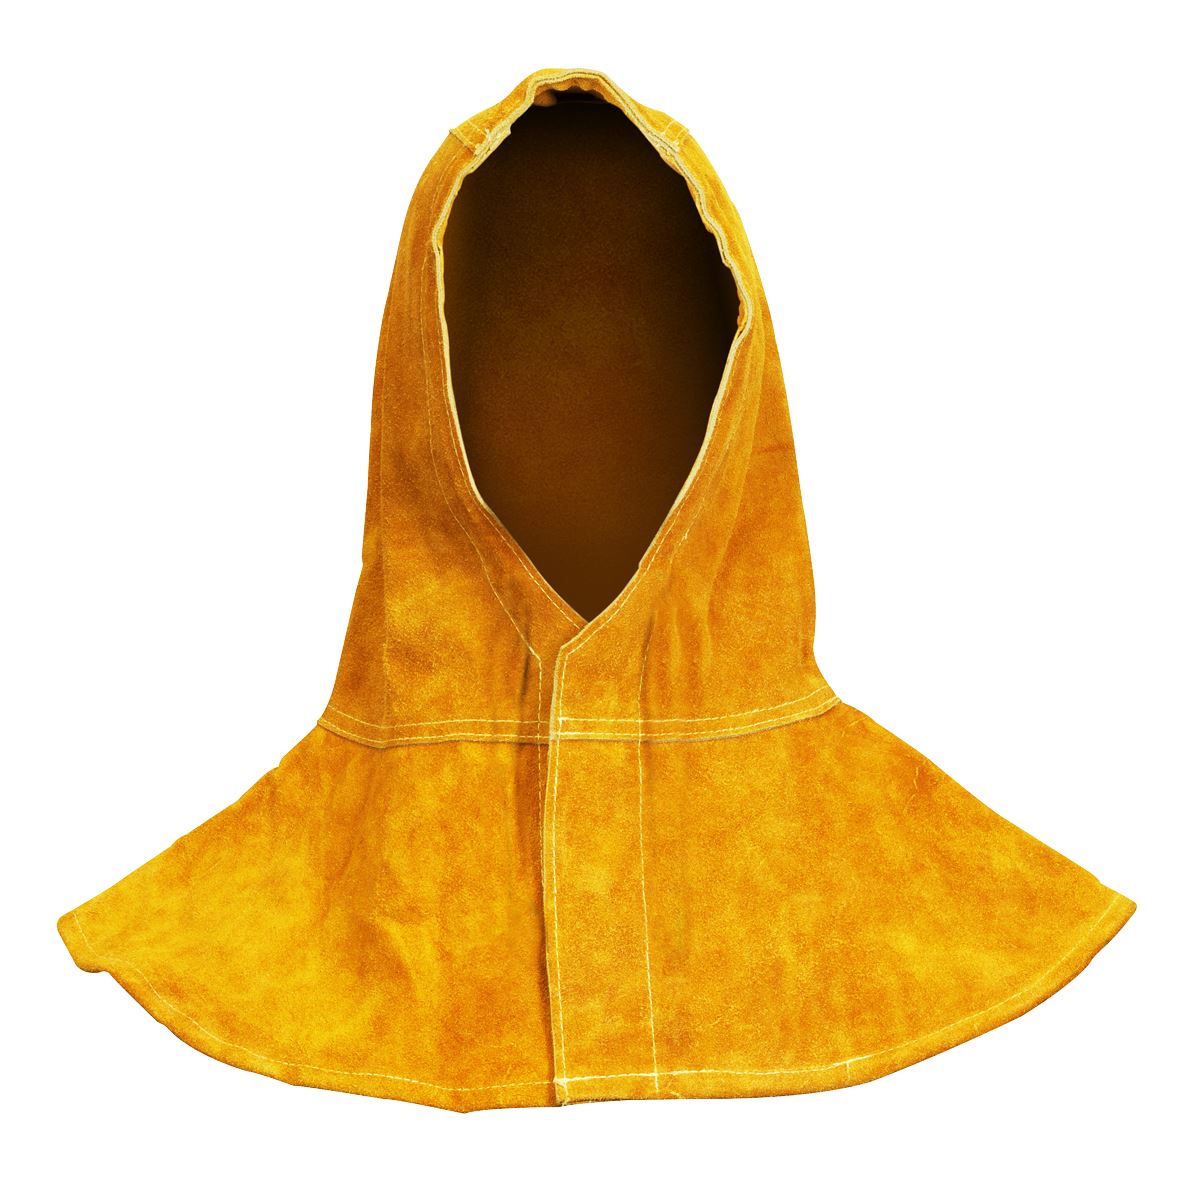 Worksafe by Sealey Leather Welding Safety Hood Heavy-Duty